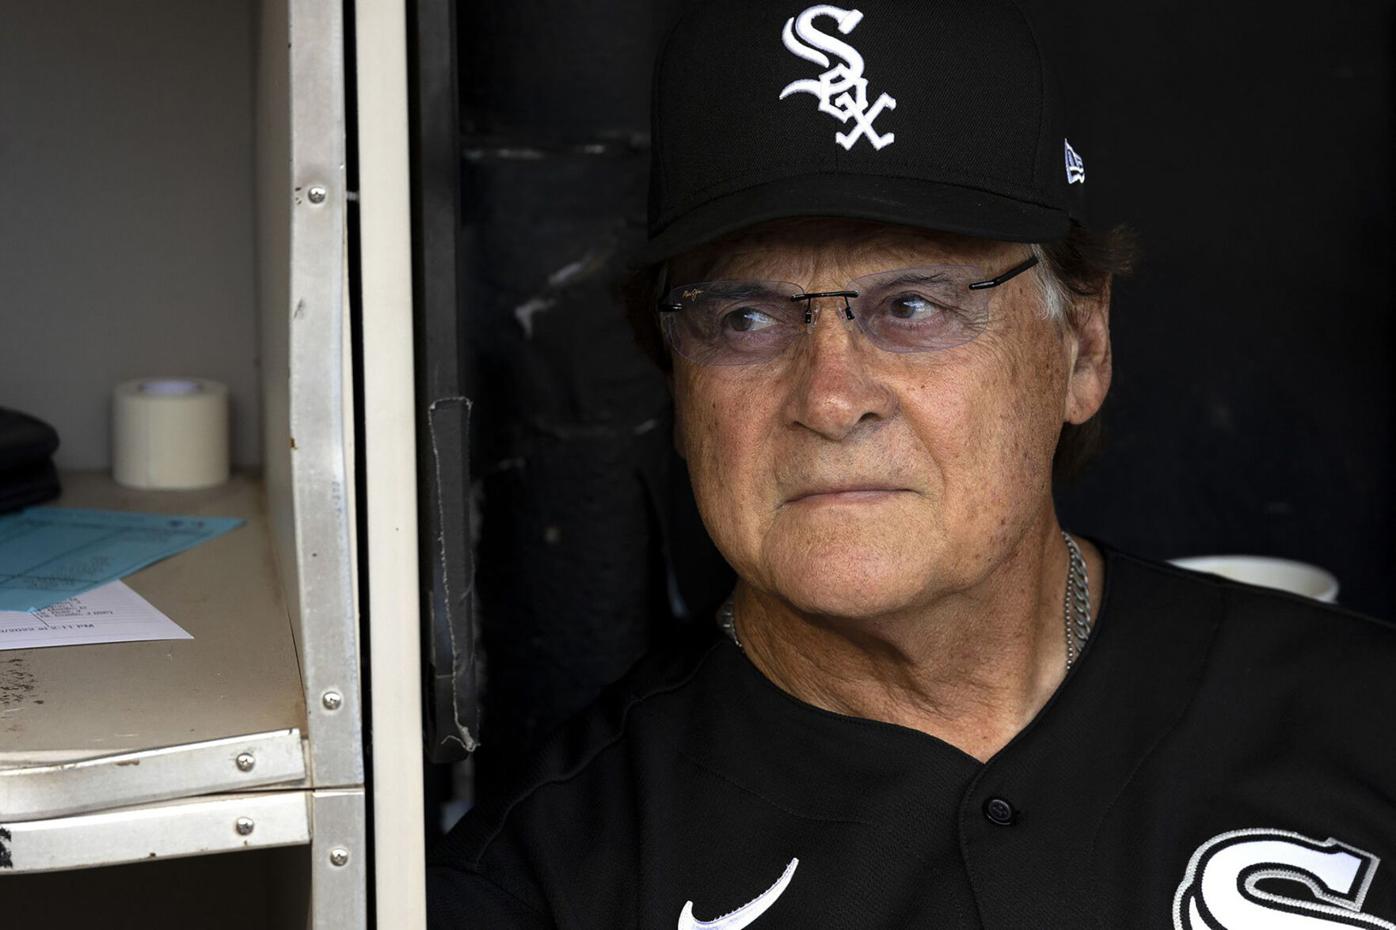 Tony La Russa out indefinitely as White Sox manager with heart issue